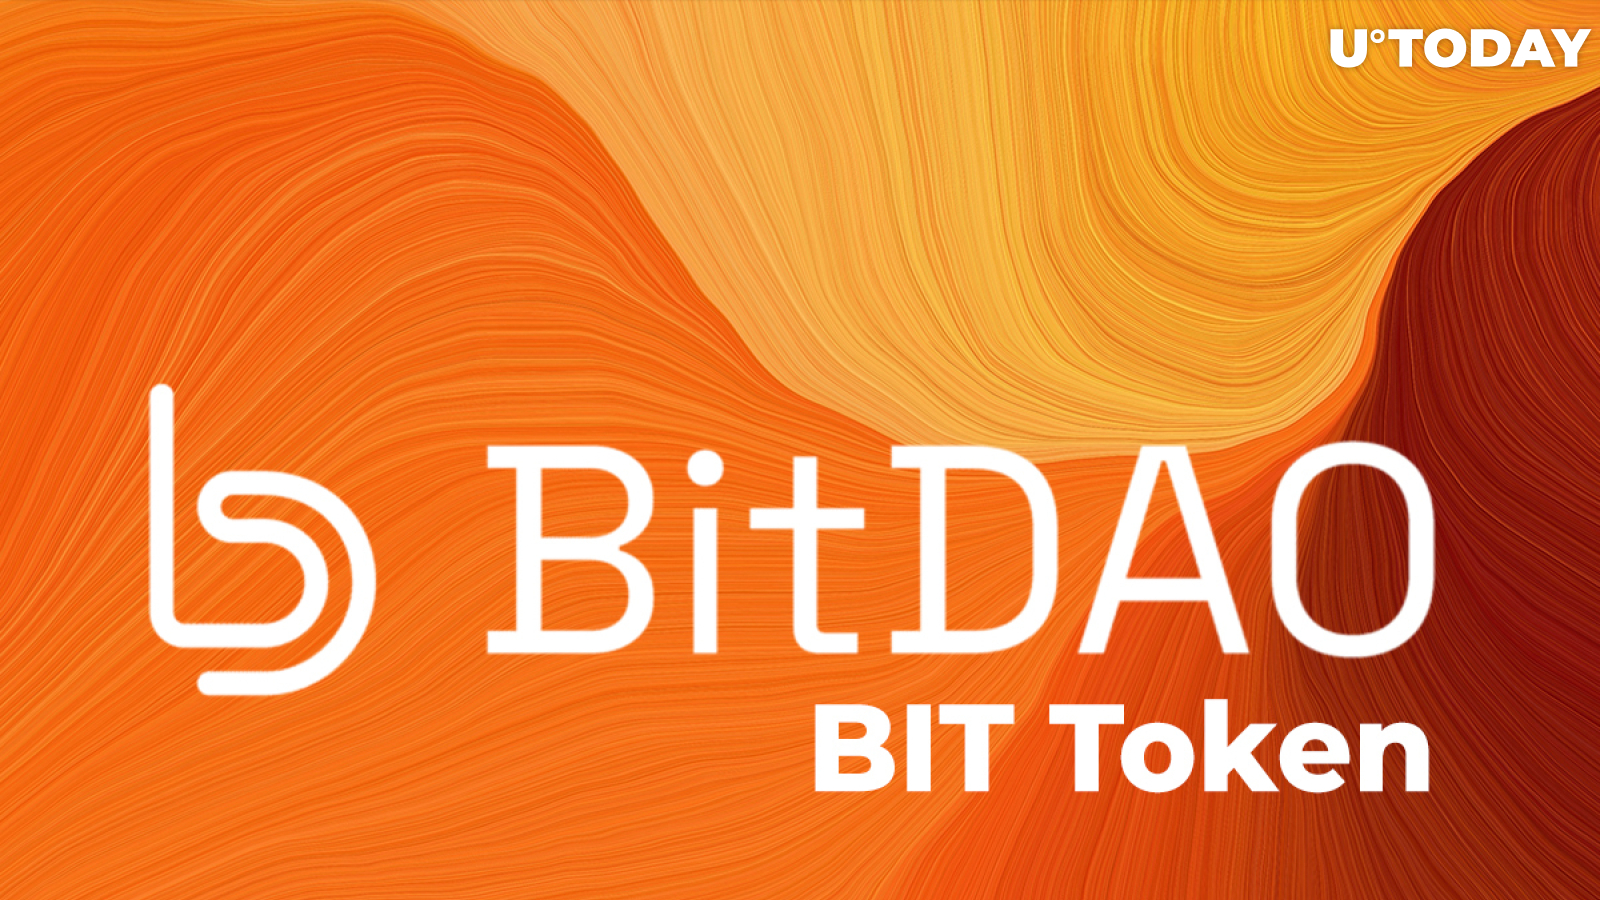 BitDAO Releases BIT Token in Collaboration with Sushi MISO: Details